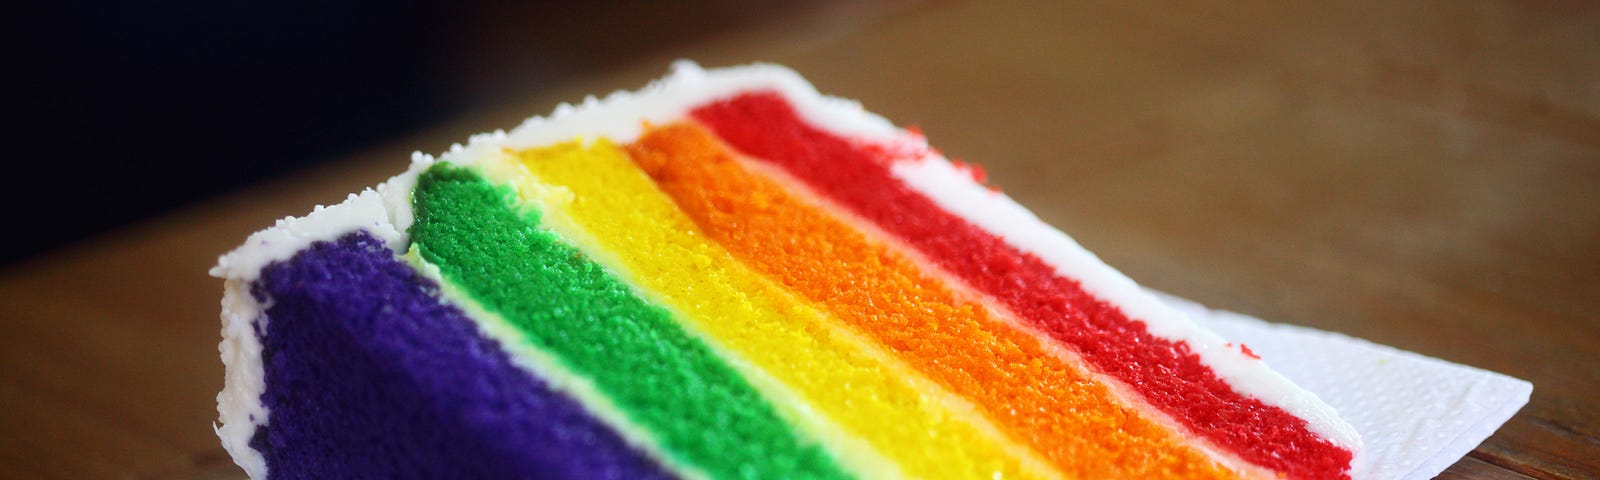 Piece of cake with rainbow layers